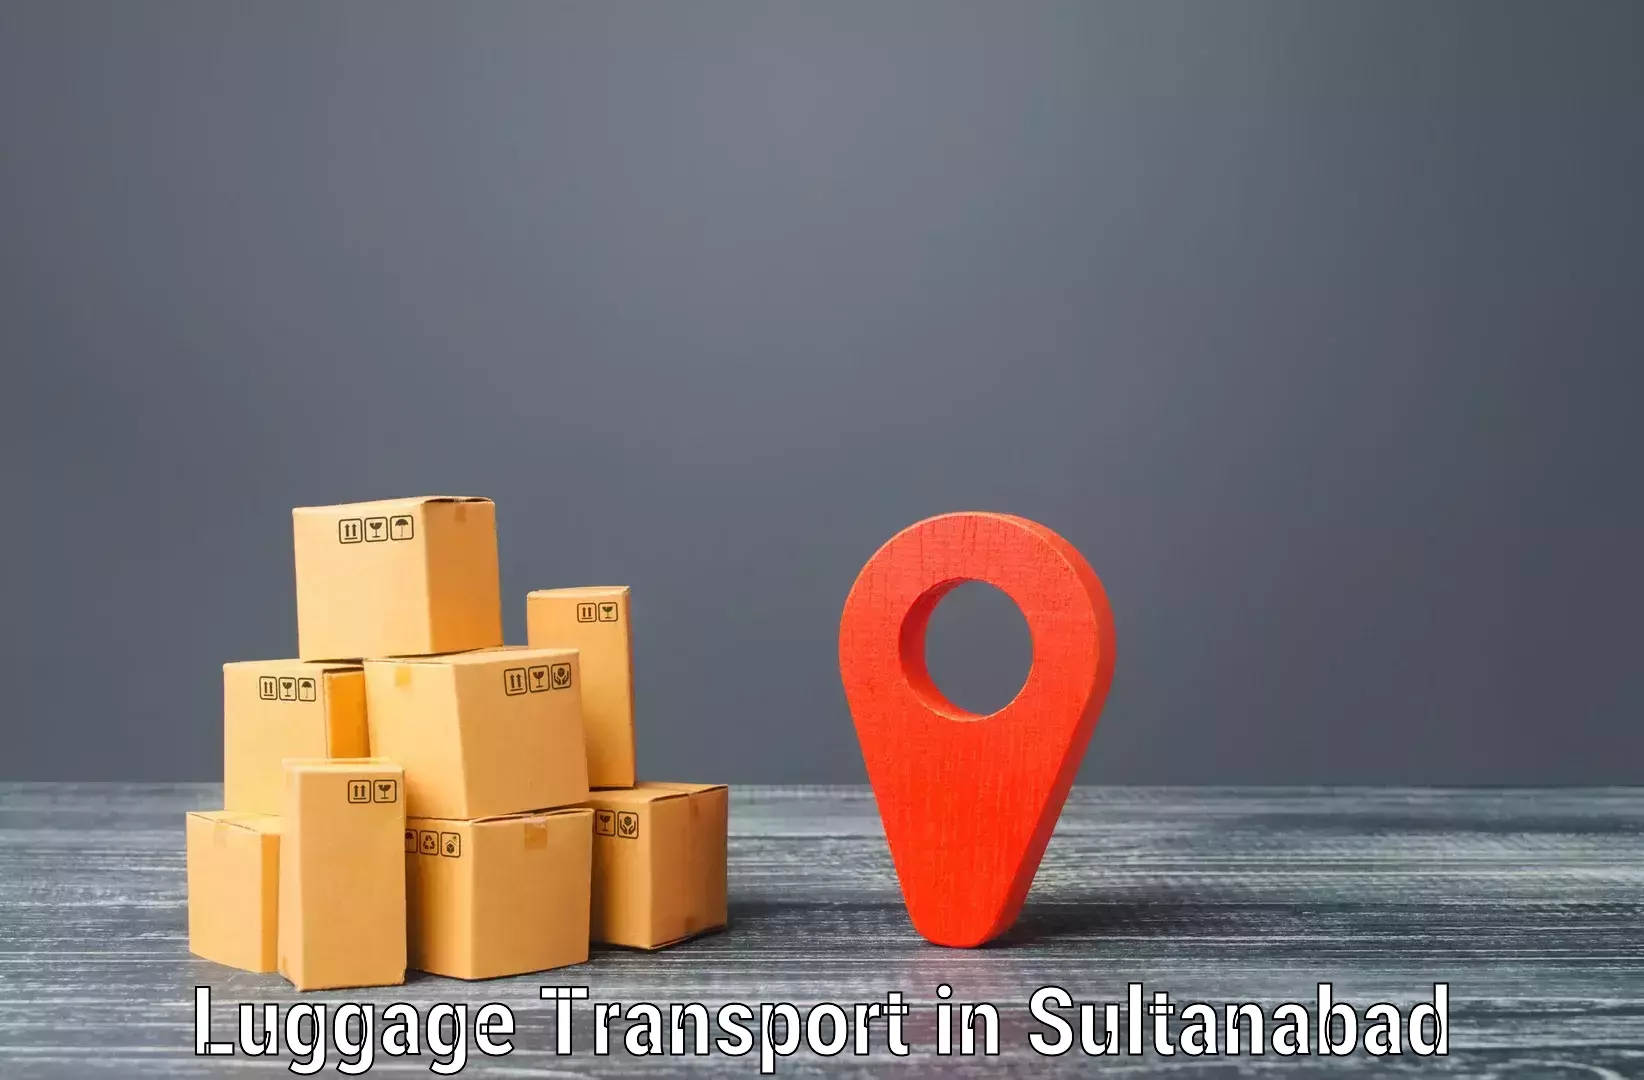 Automated luggage transport in Sultanabad